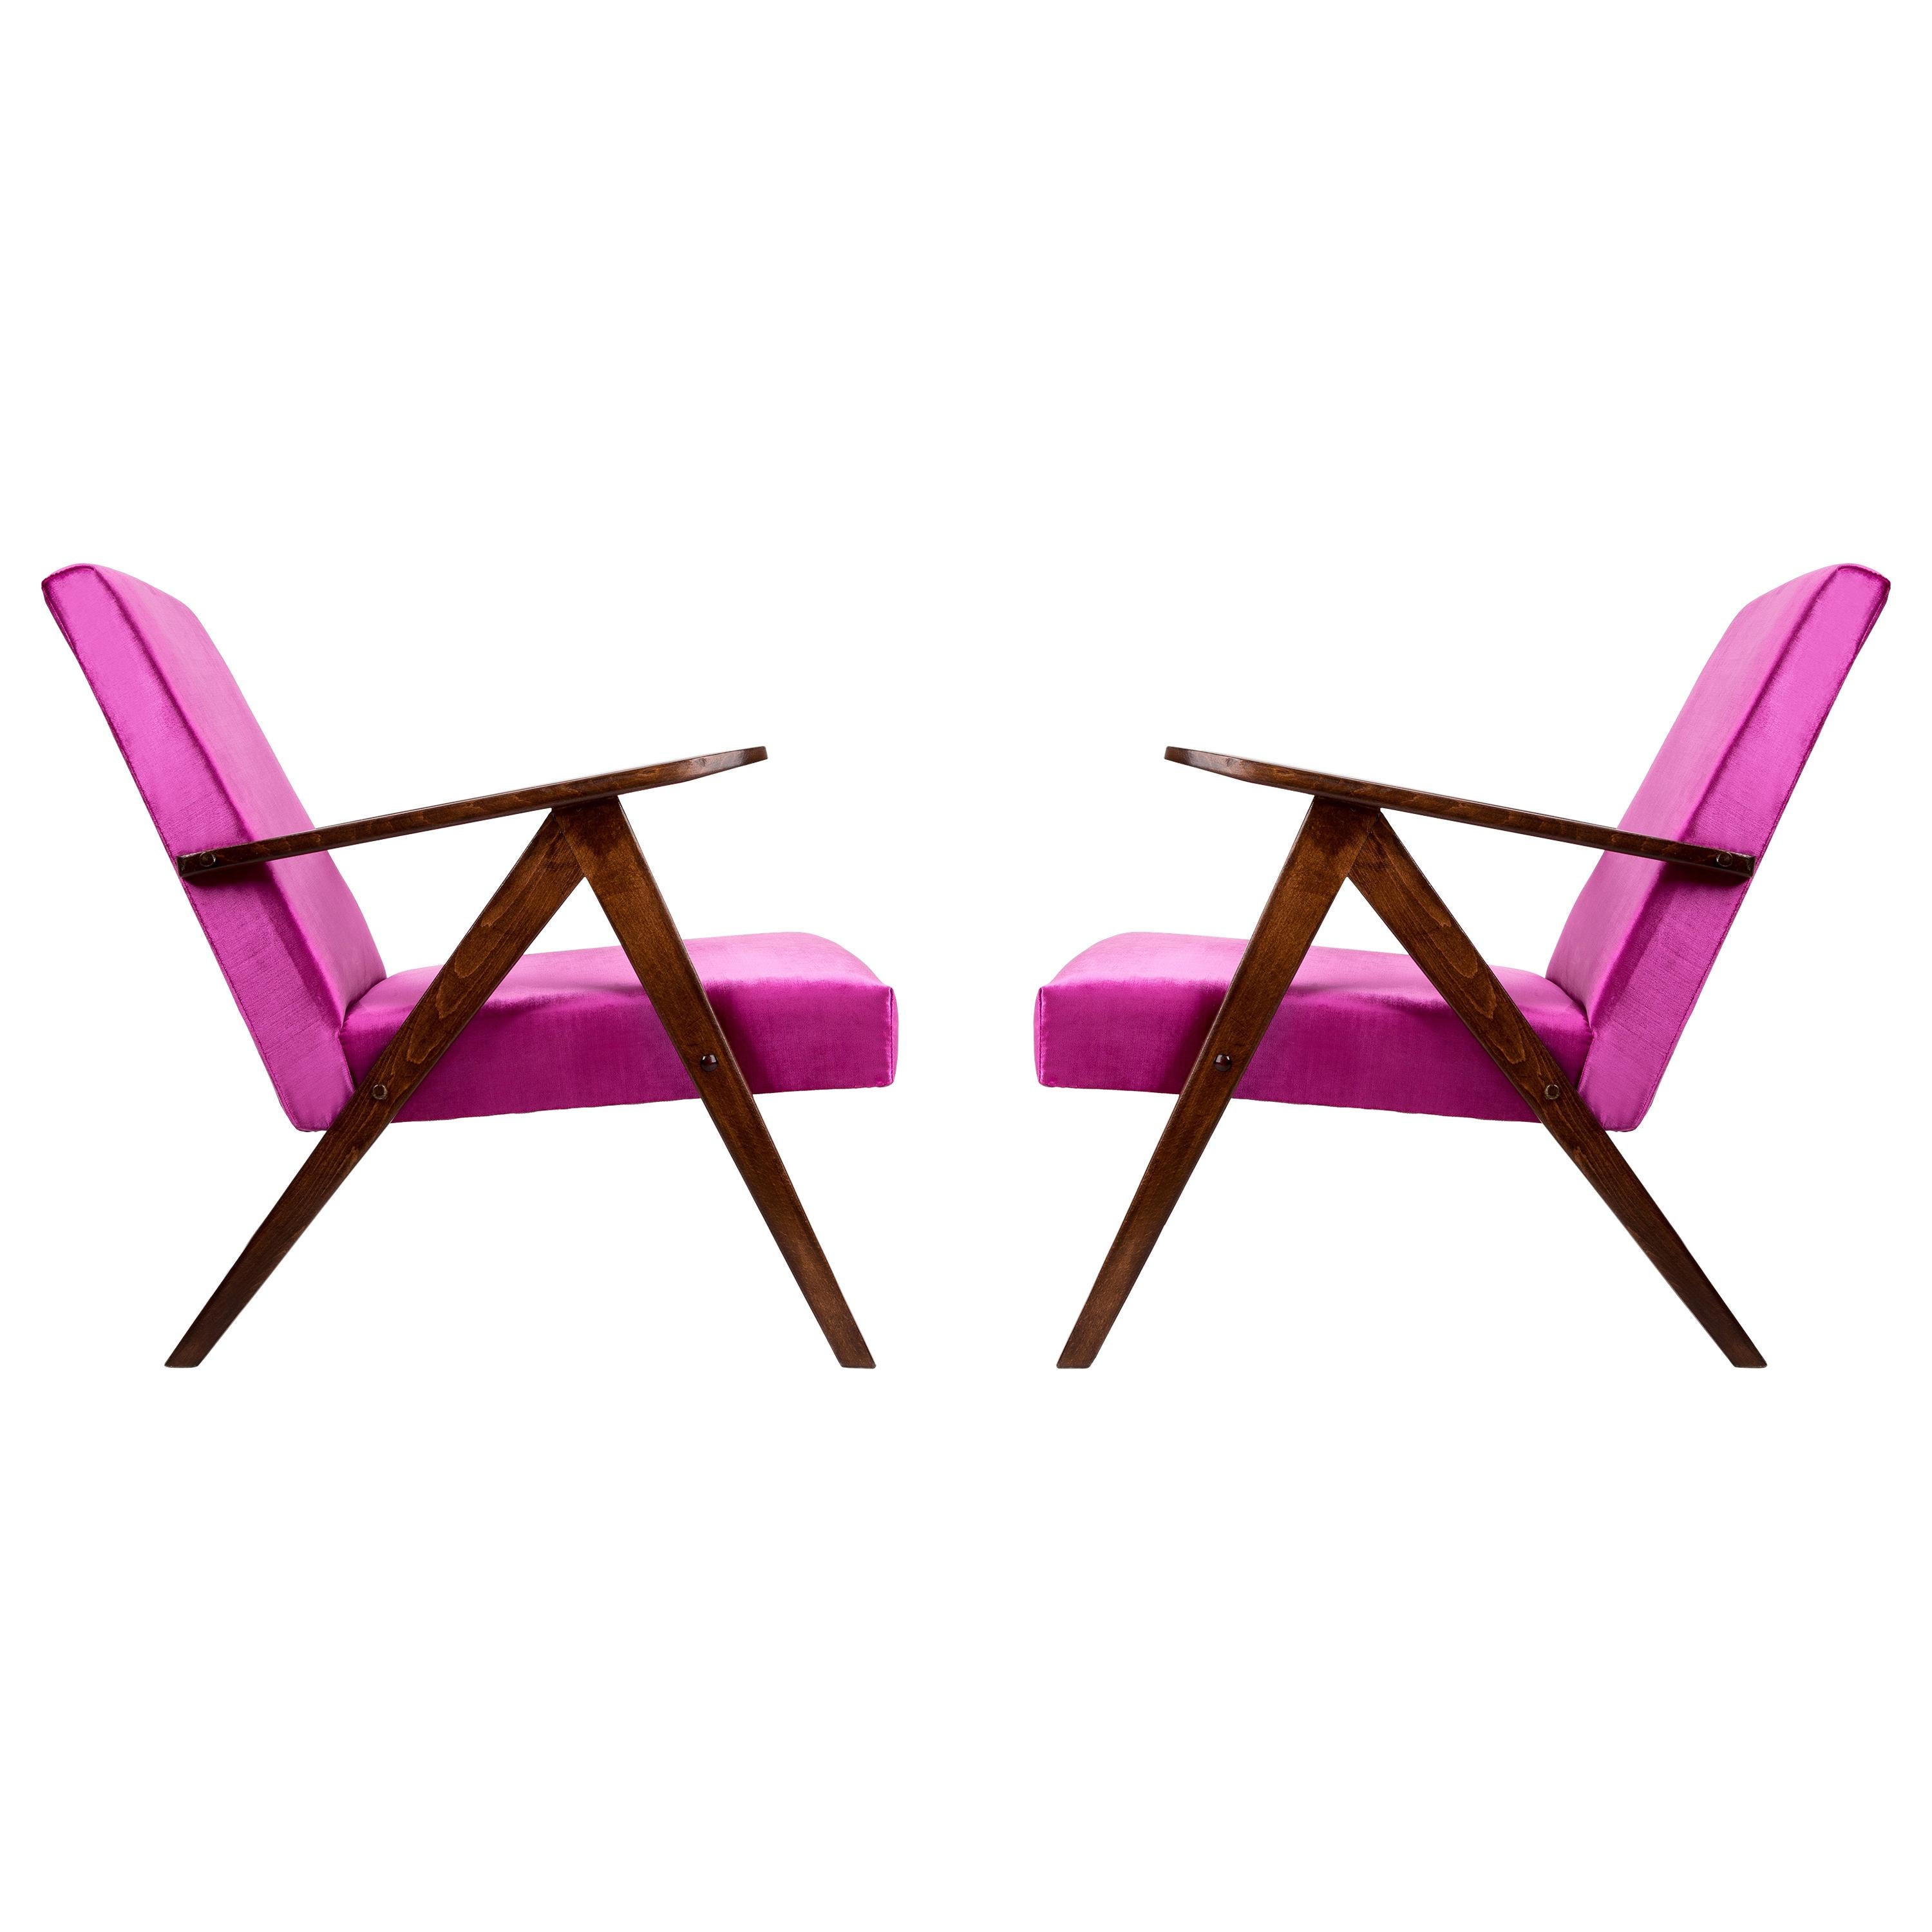 Set of Two Mid-Century Modern Magenta Pink Armchairs, 1960s, Poland